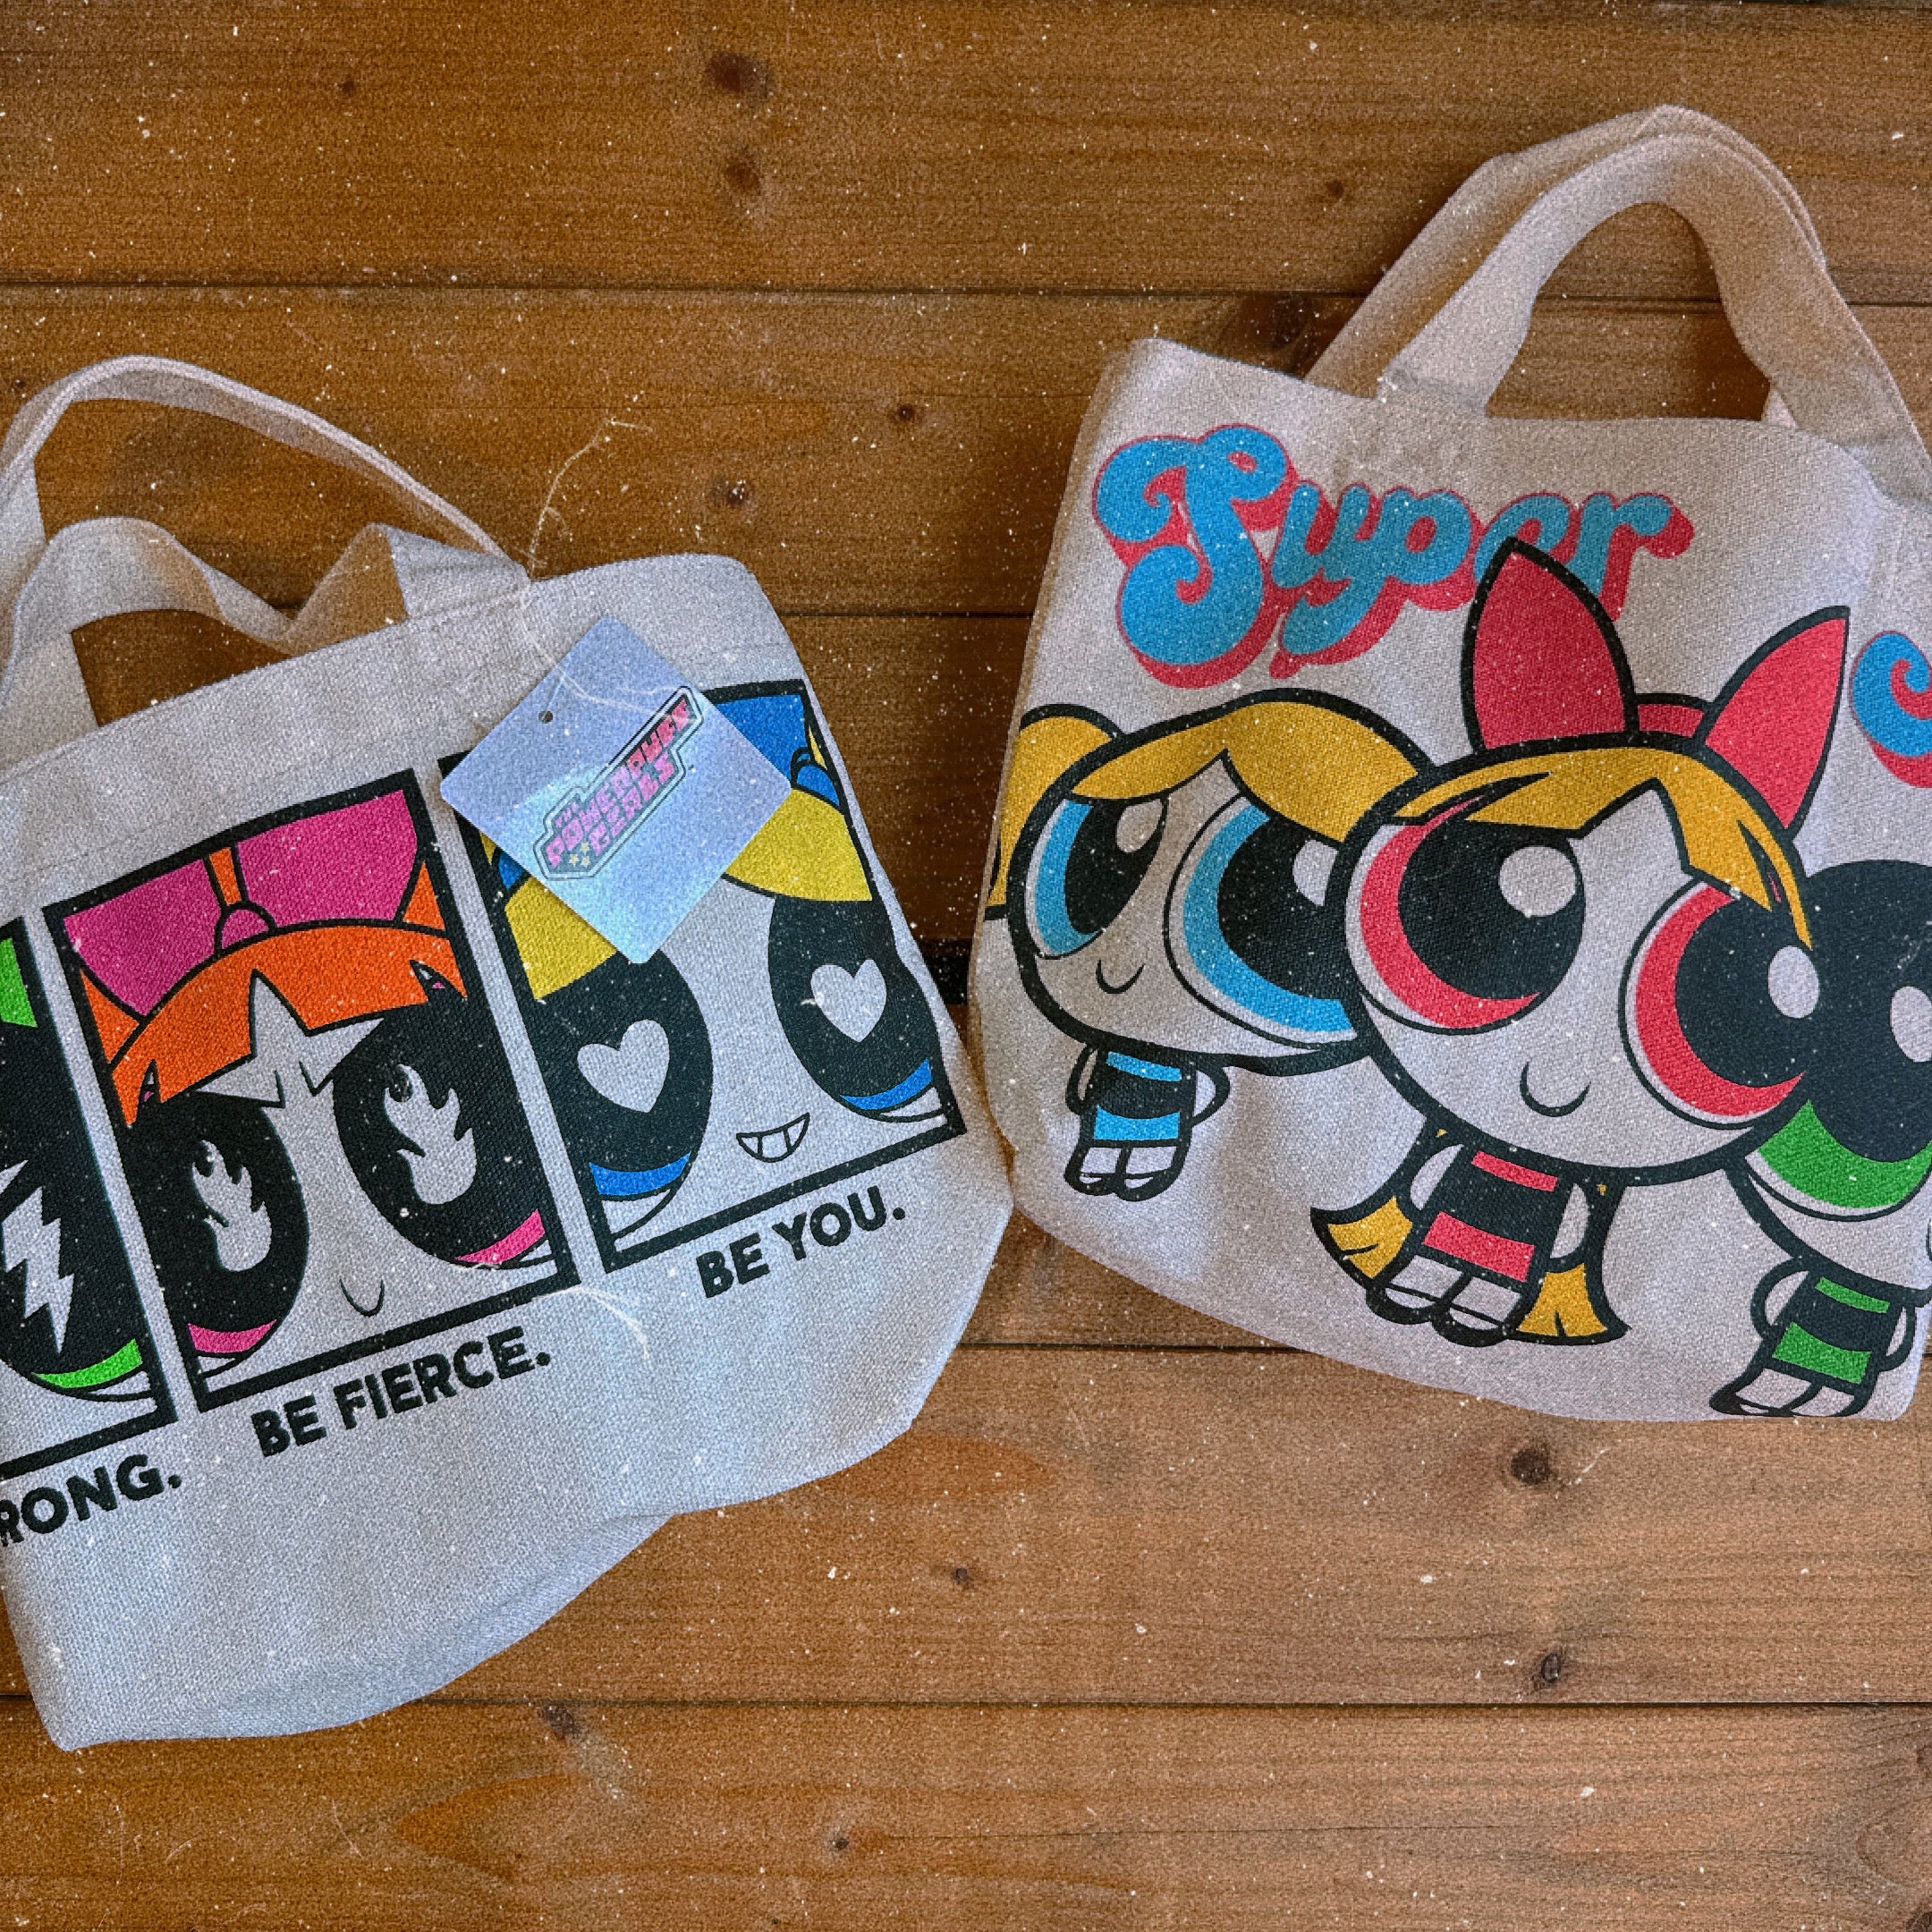 Pre-order: 2 types of Powerpuff Girl mini tote bags. Shipment scheduled for April 9th.